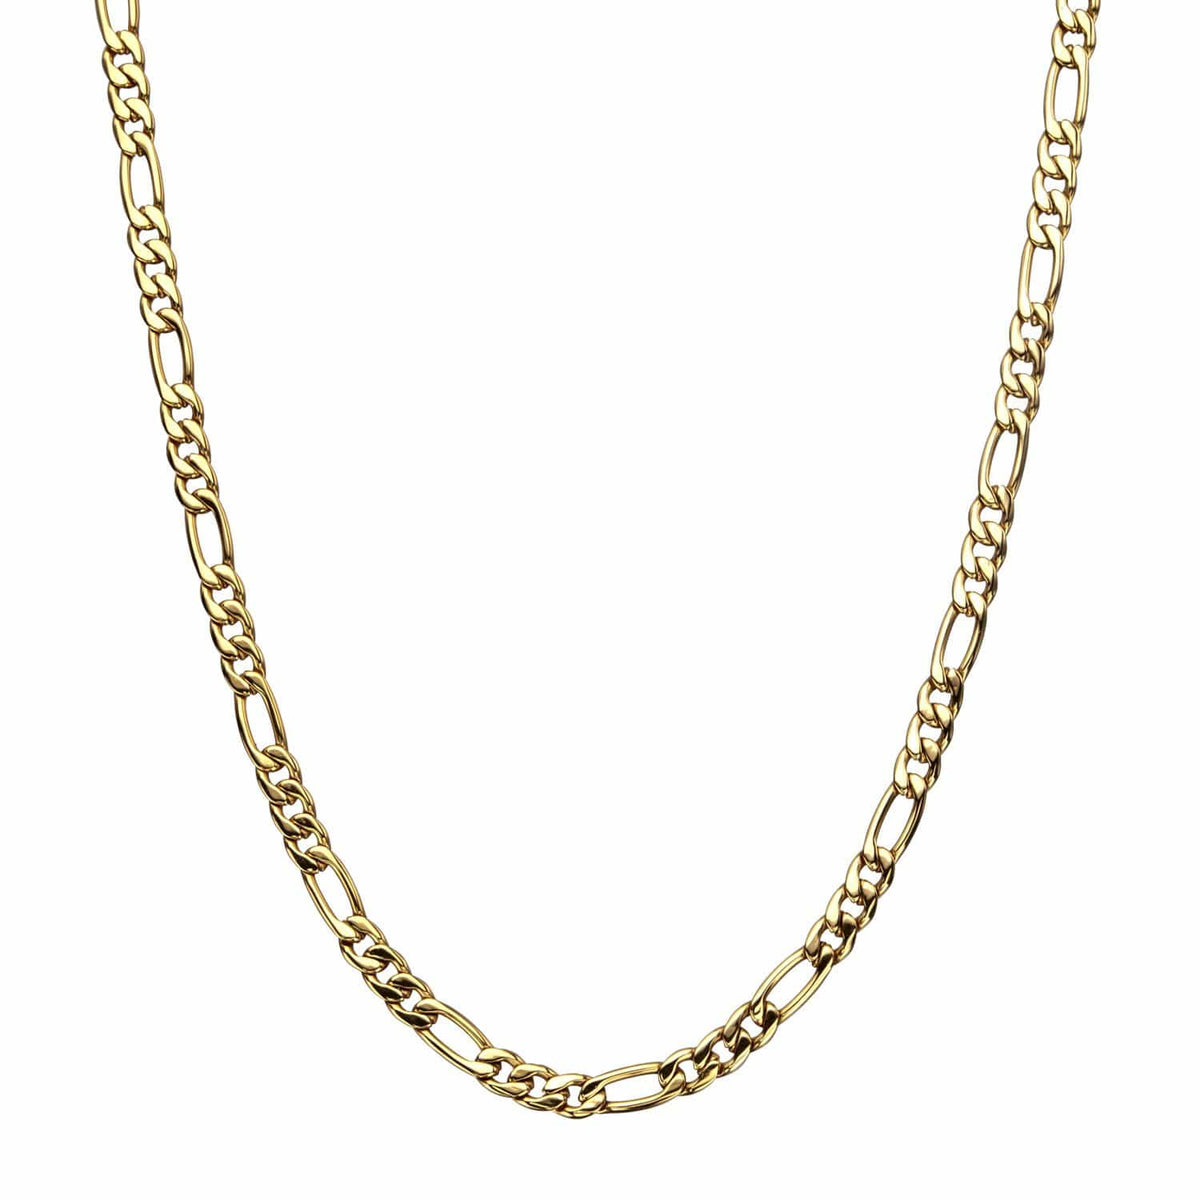 INOX JEWELRY Chains Golden Tone Stainless Steel Polished 6mm Classic Figaro Chain